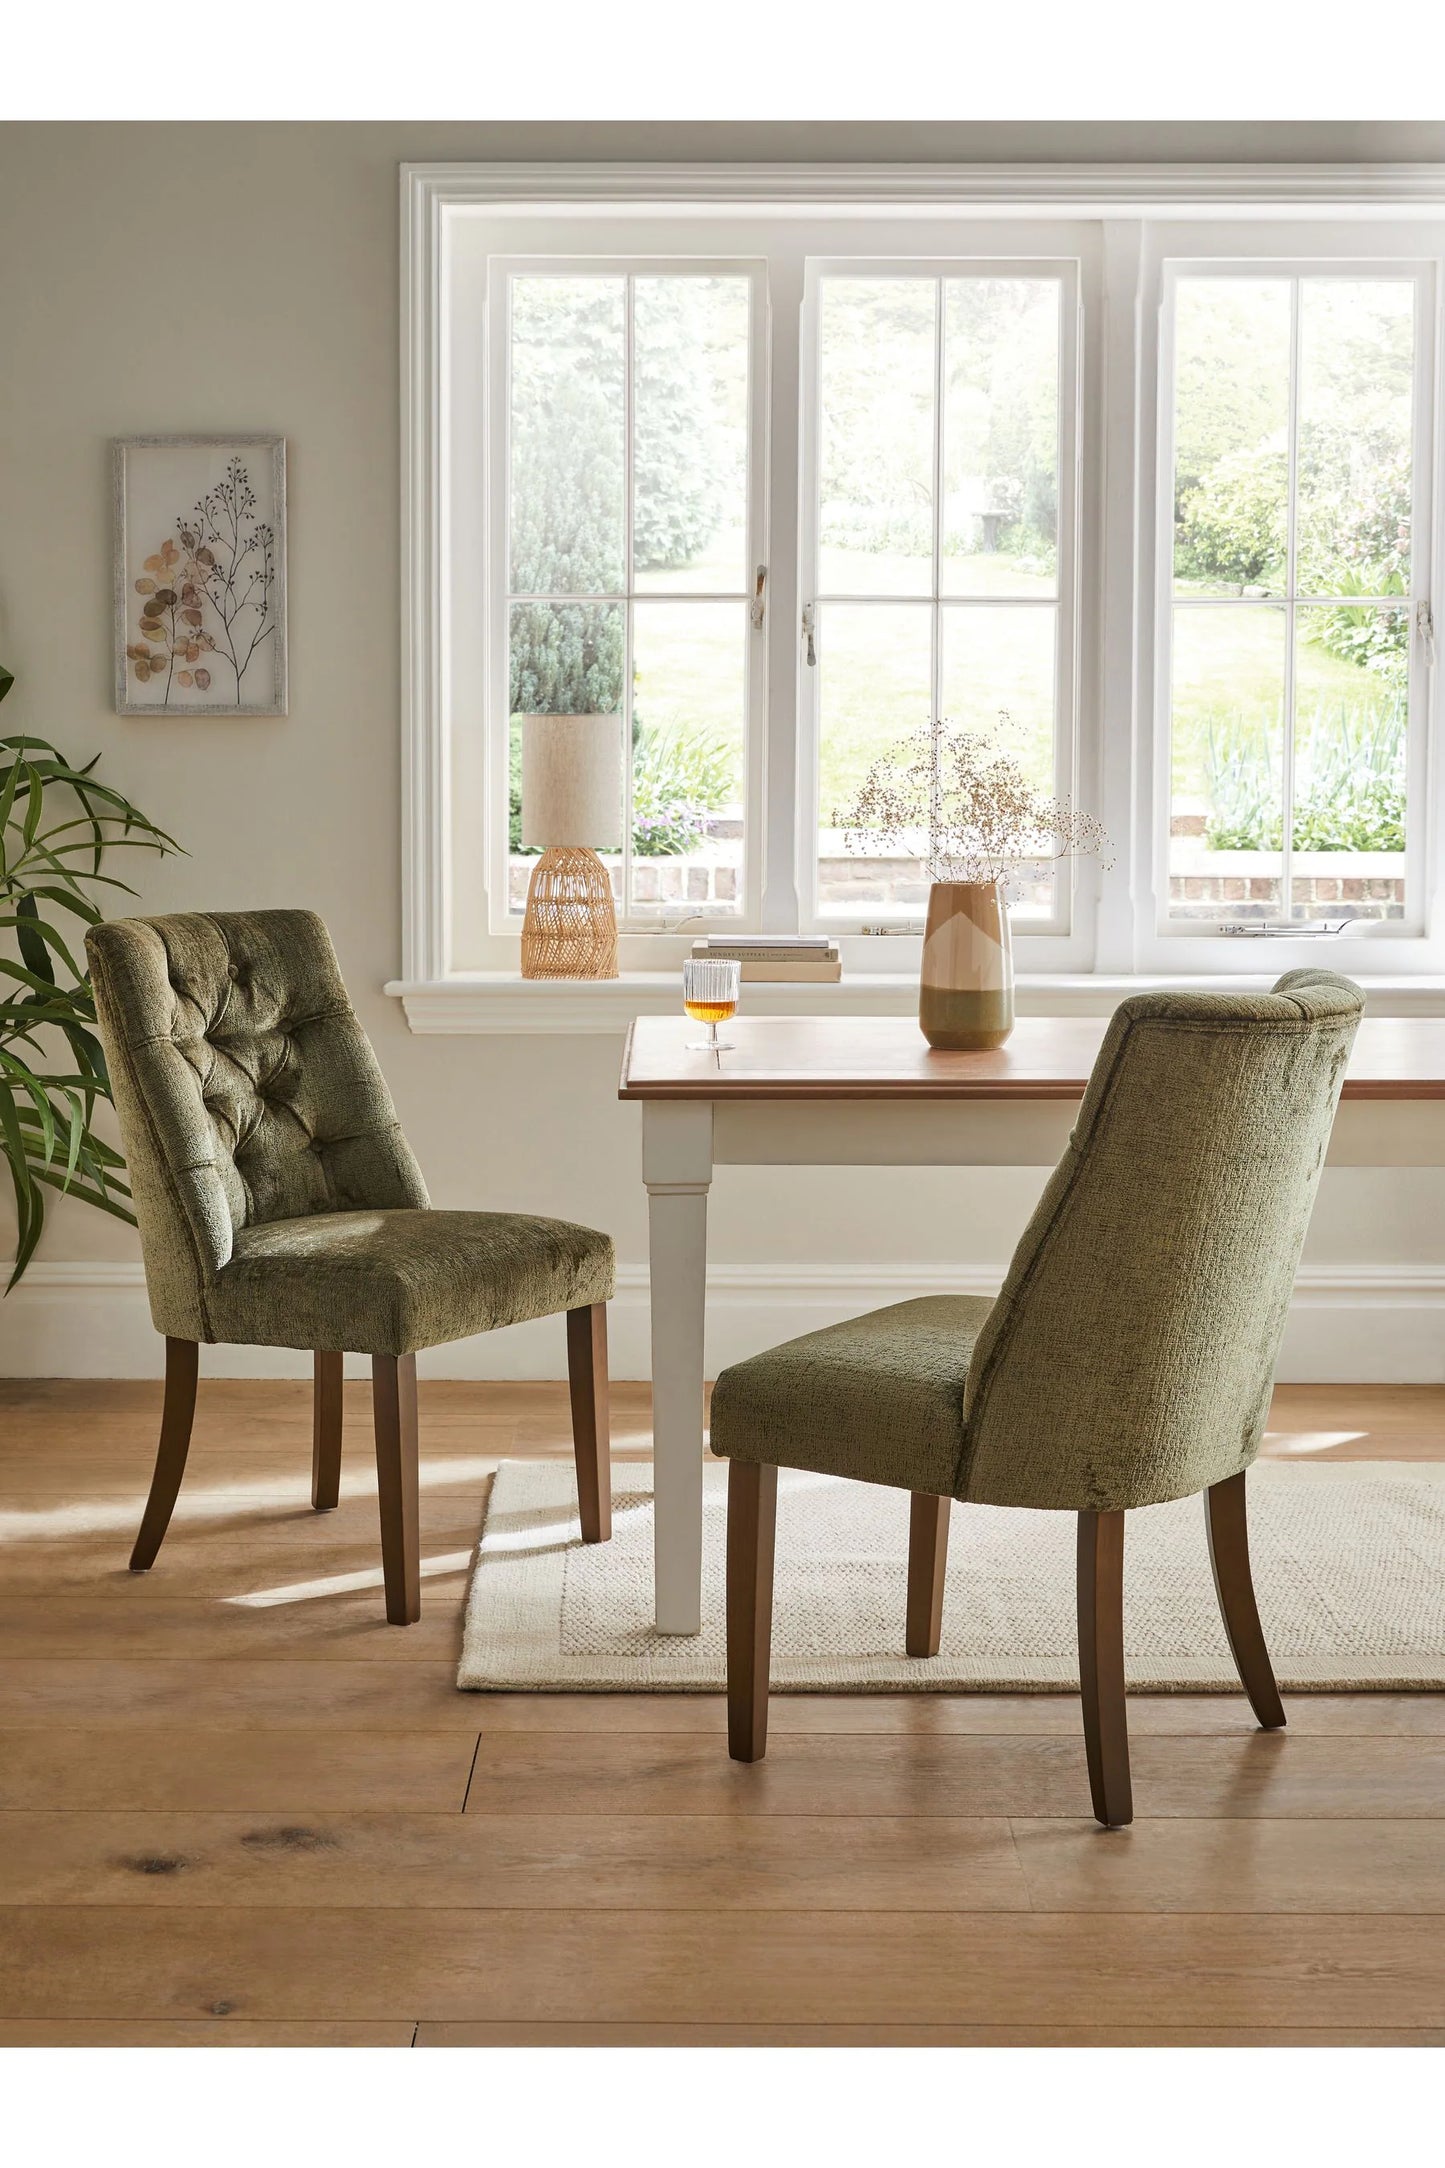 Wolton Luxe Plush Chenille Mosh Green Dining Chairs - Set of 2